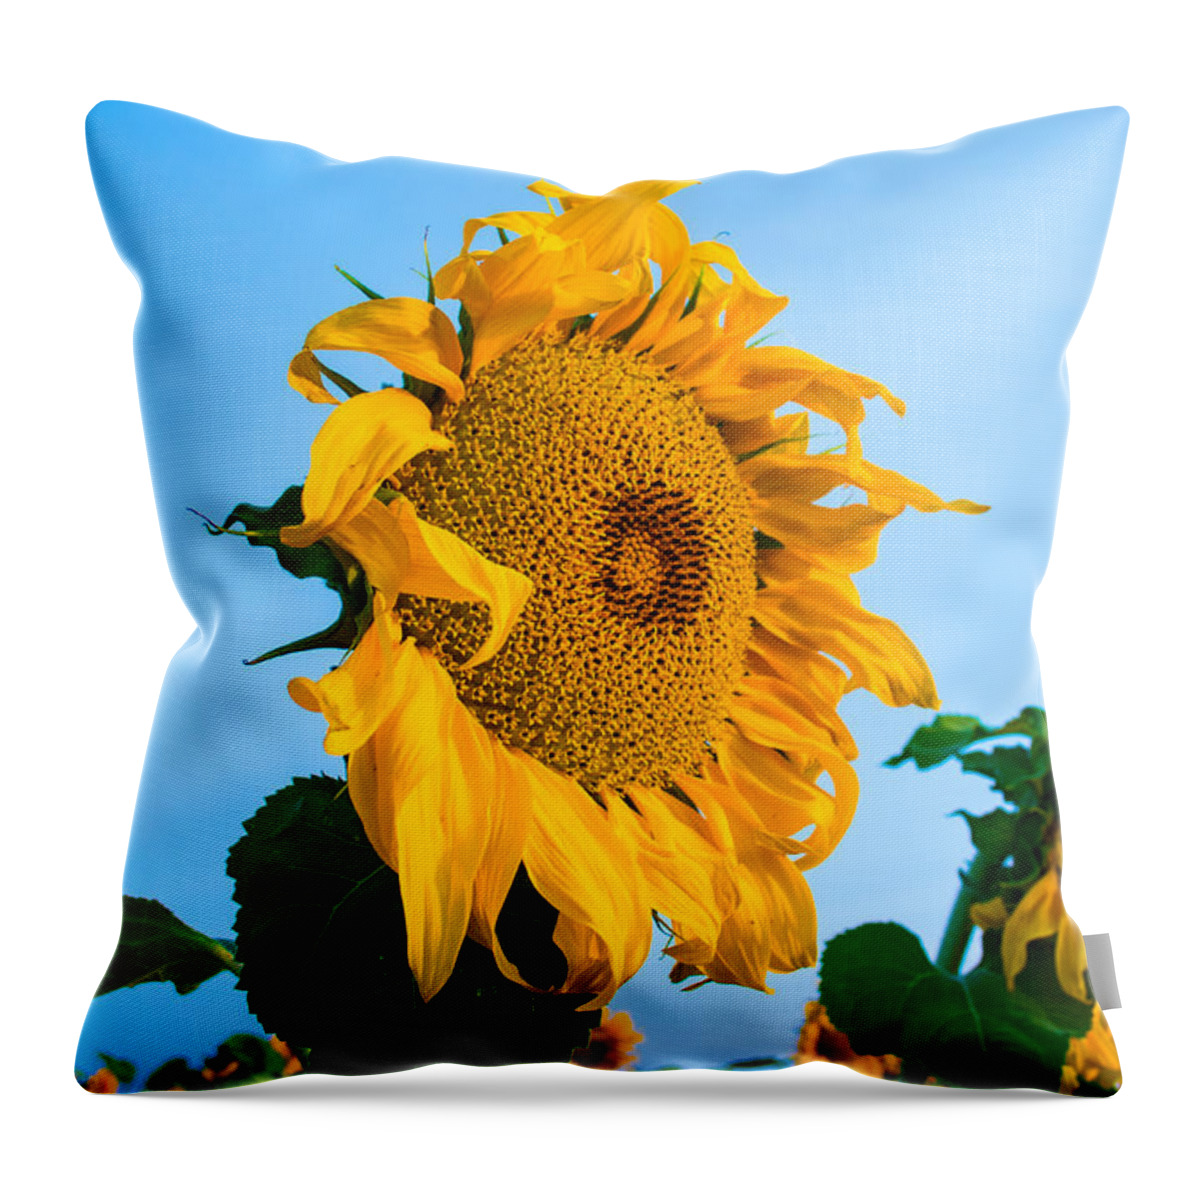 Sunrise Throw Pillow featuring the photograph Sunflower Morning #2 by Mindy Musick King